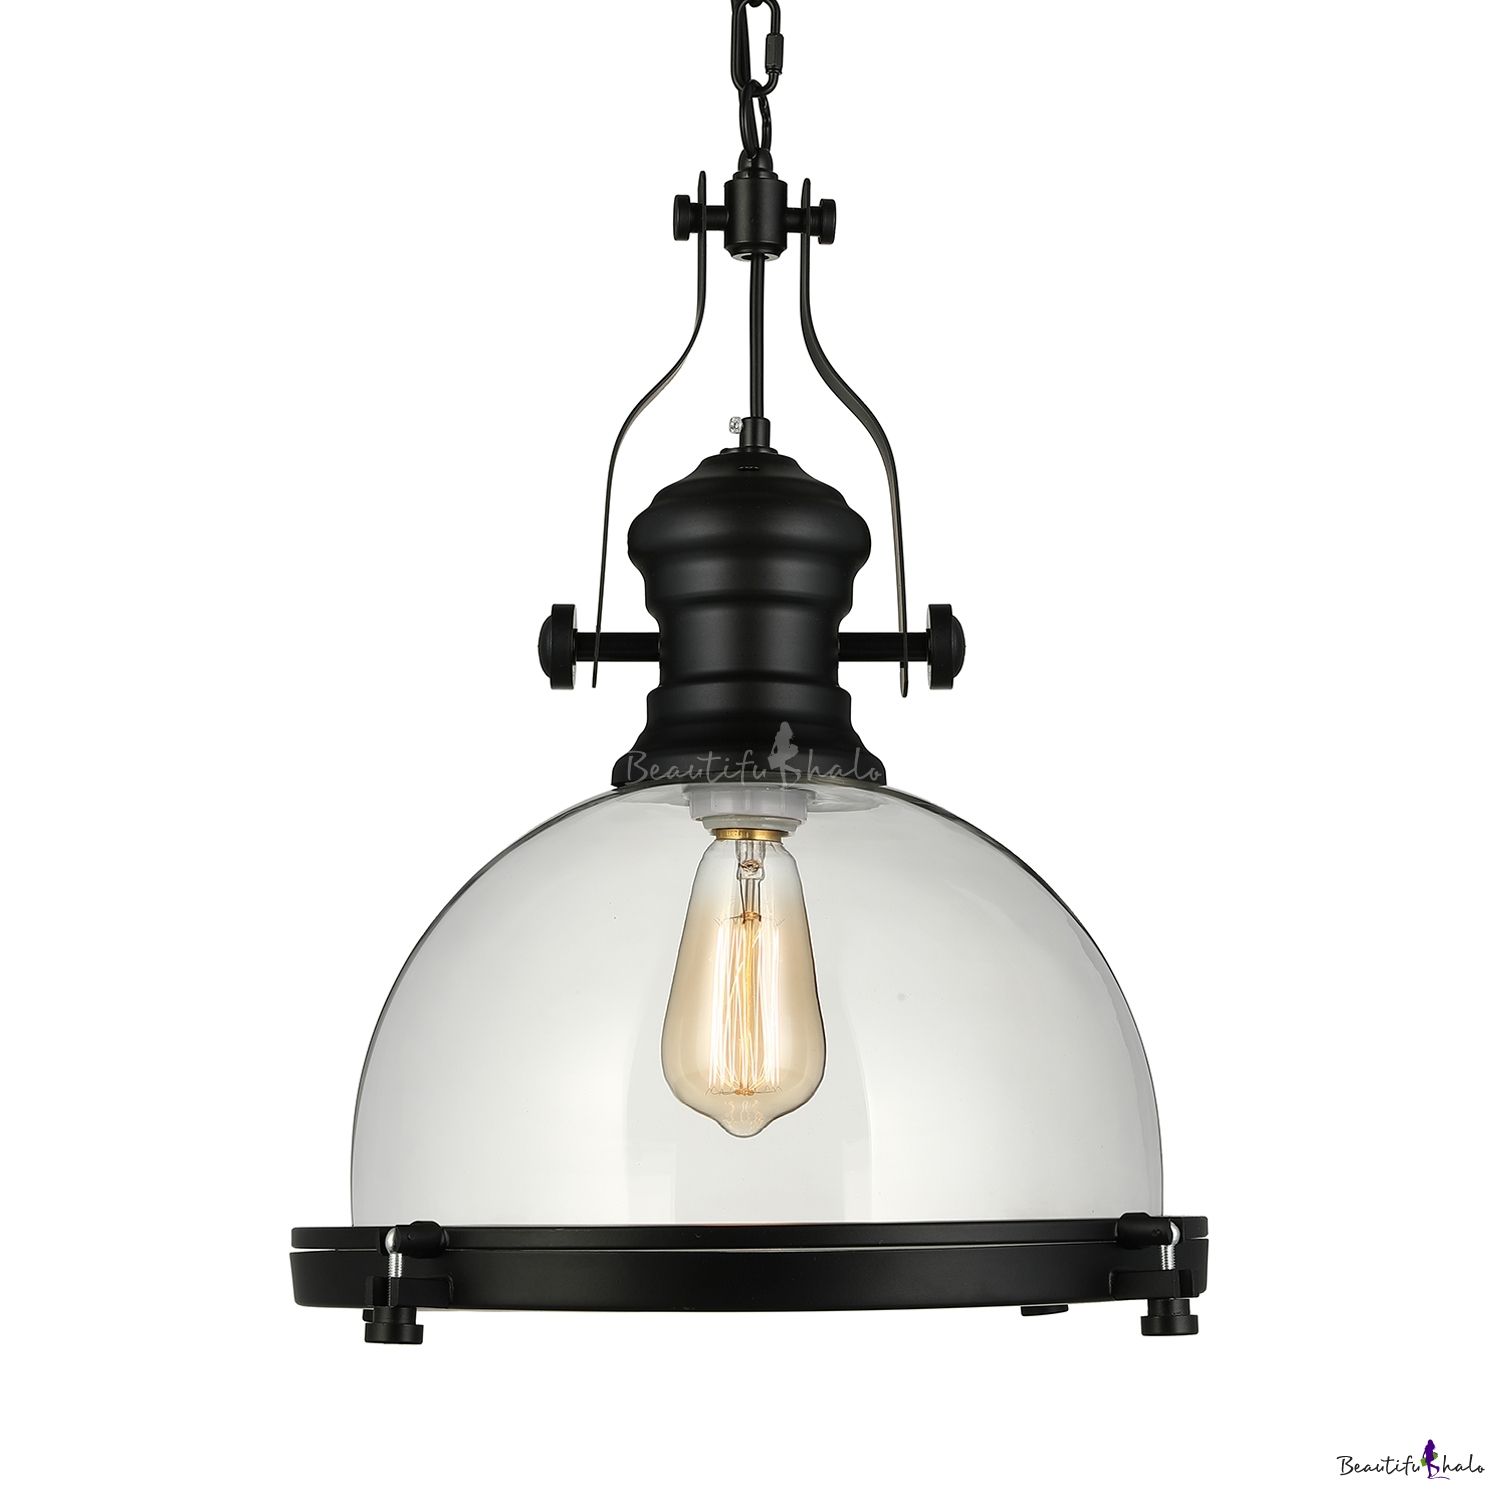 Clear Glass Dome Pendant Light In Black Finish For Kitchen Regarding Black And Gold Kitchen Island Light Pendant (View 11 of 15)